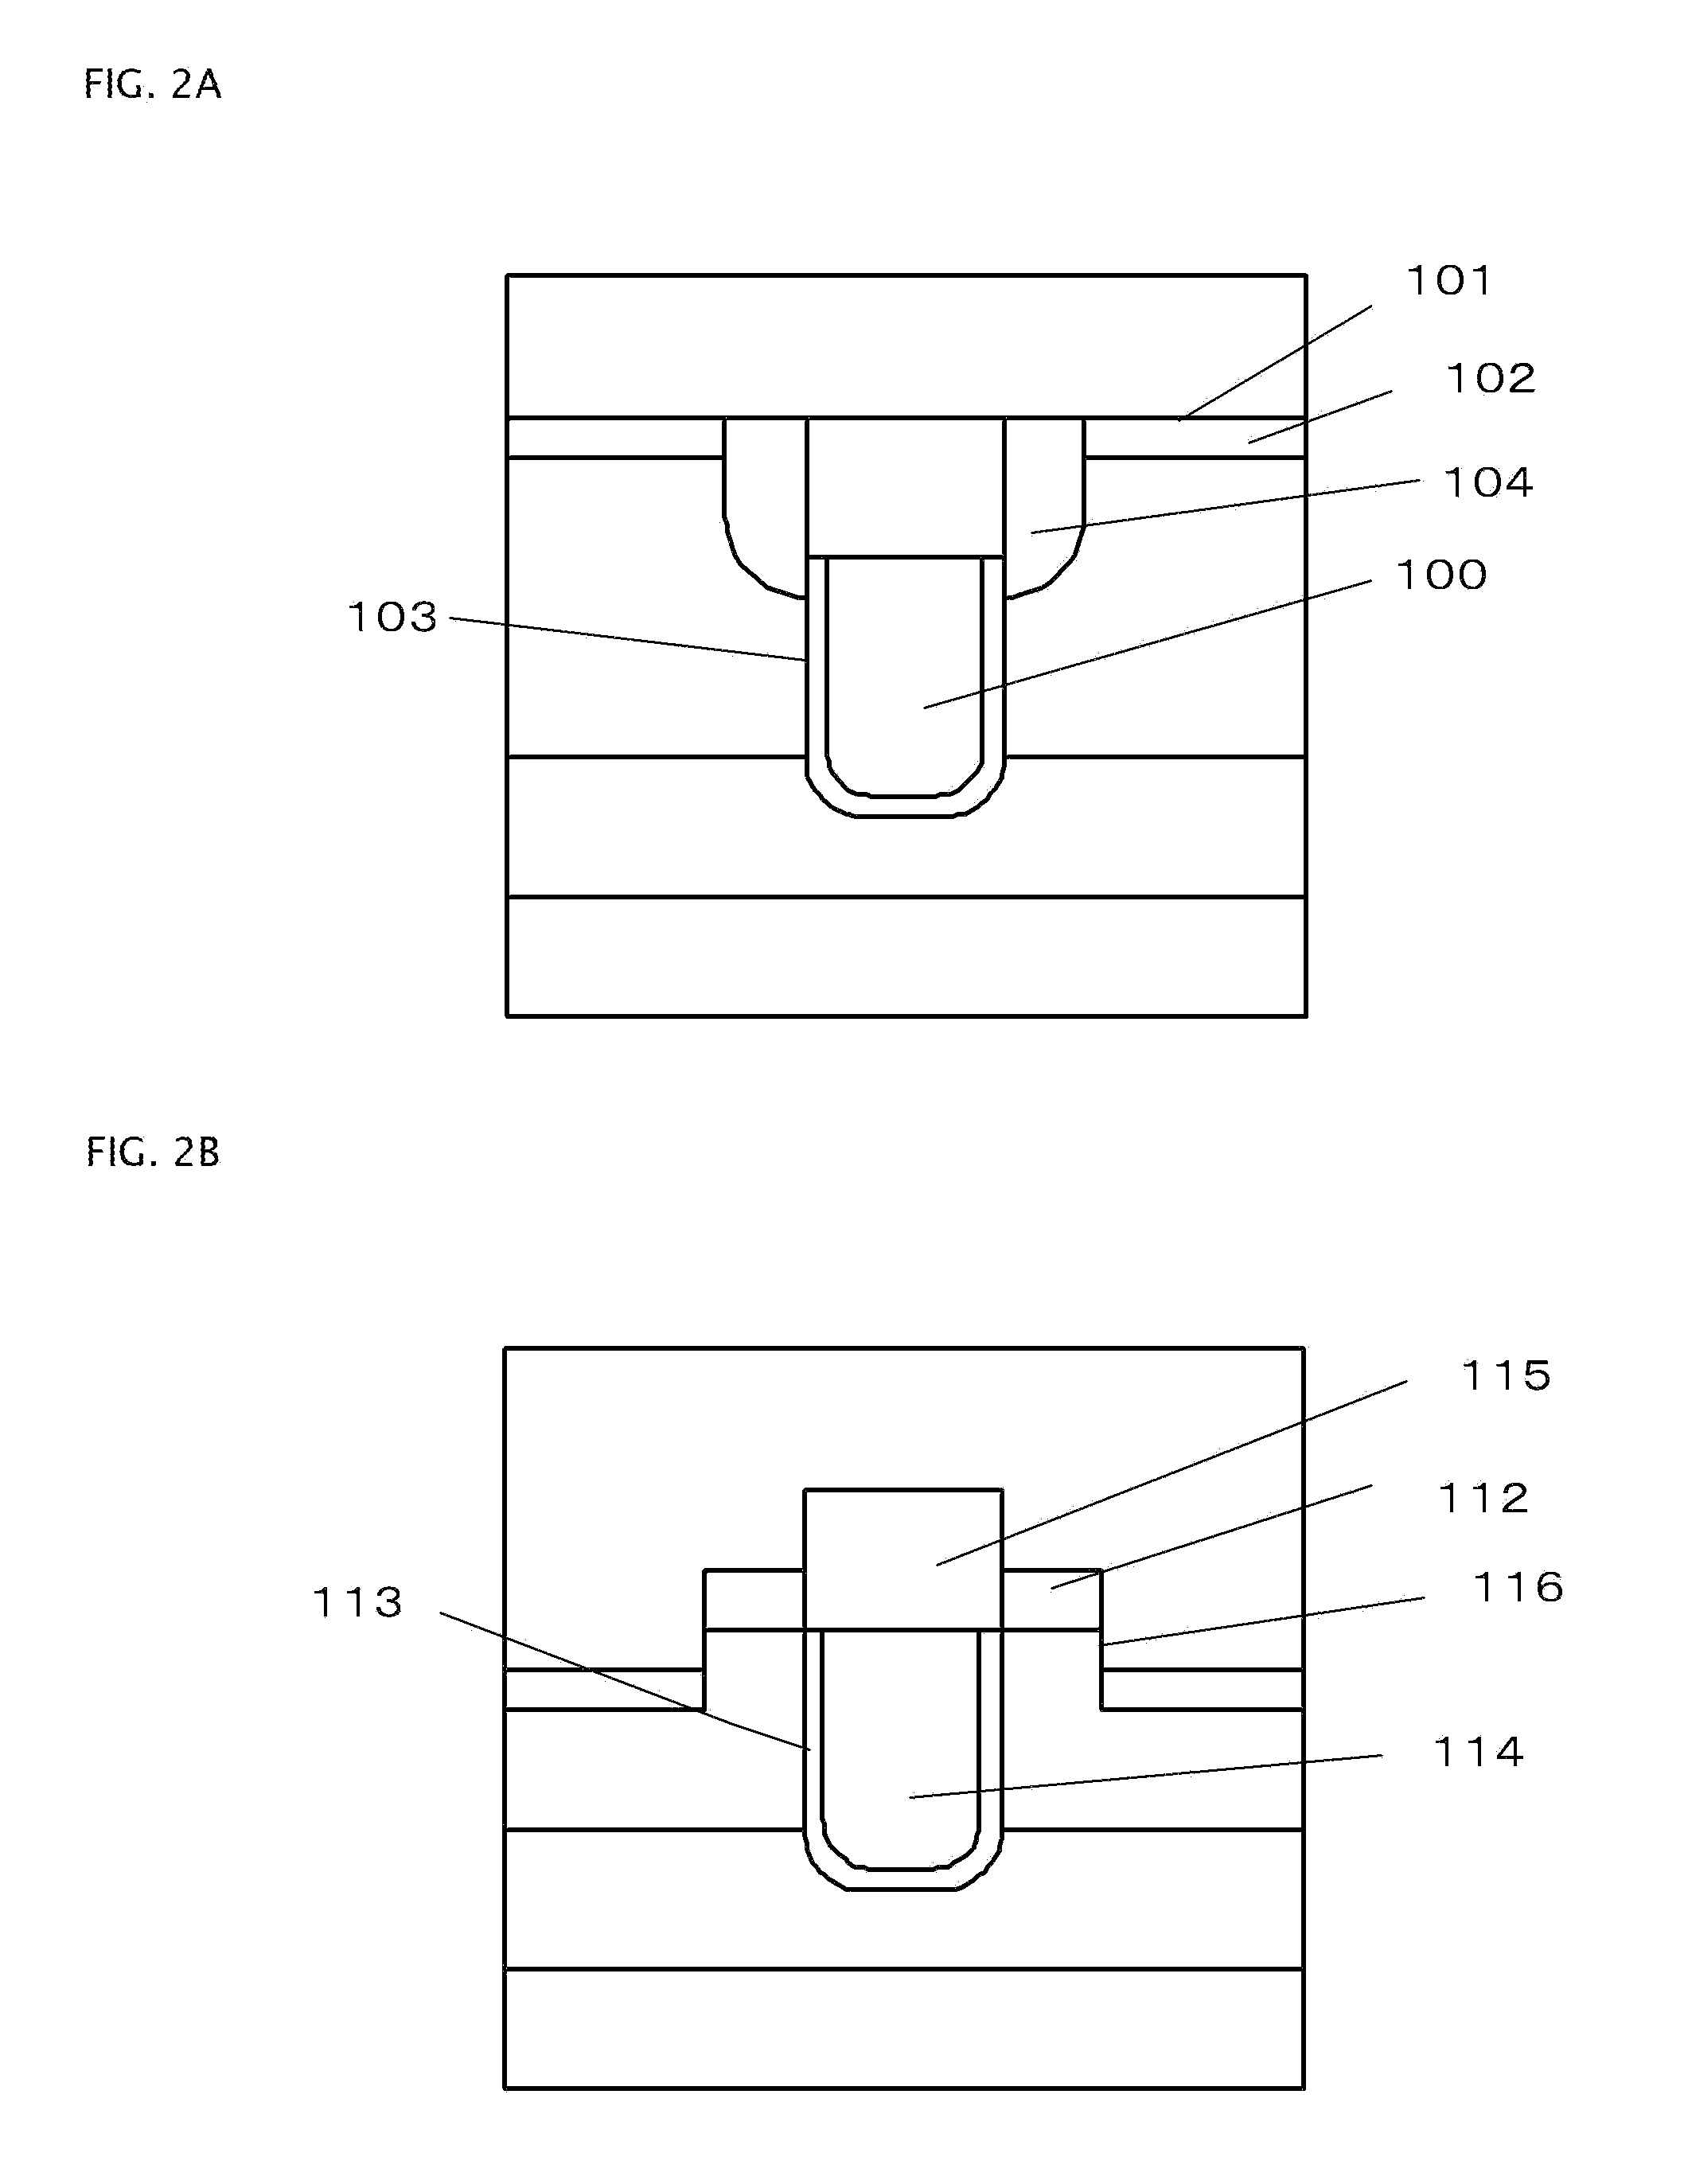 Trench gate semiconductor device and the method of manufacturing the same